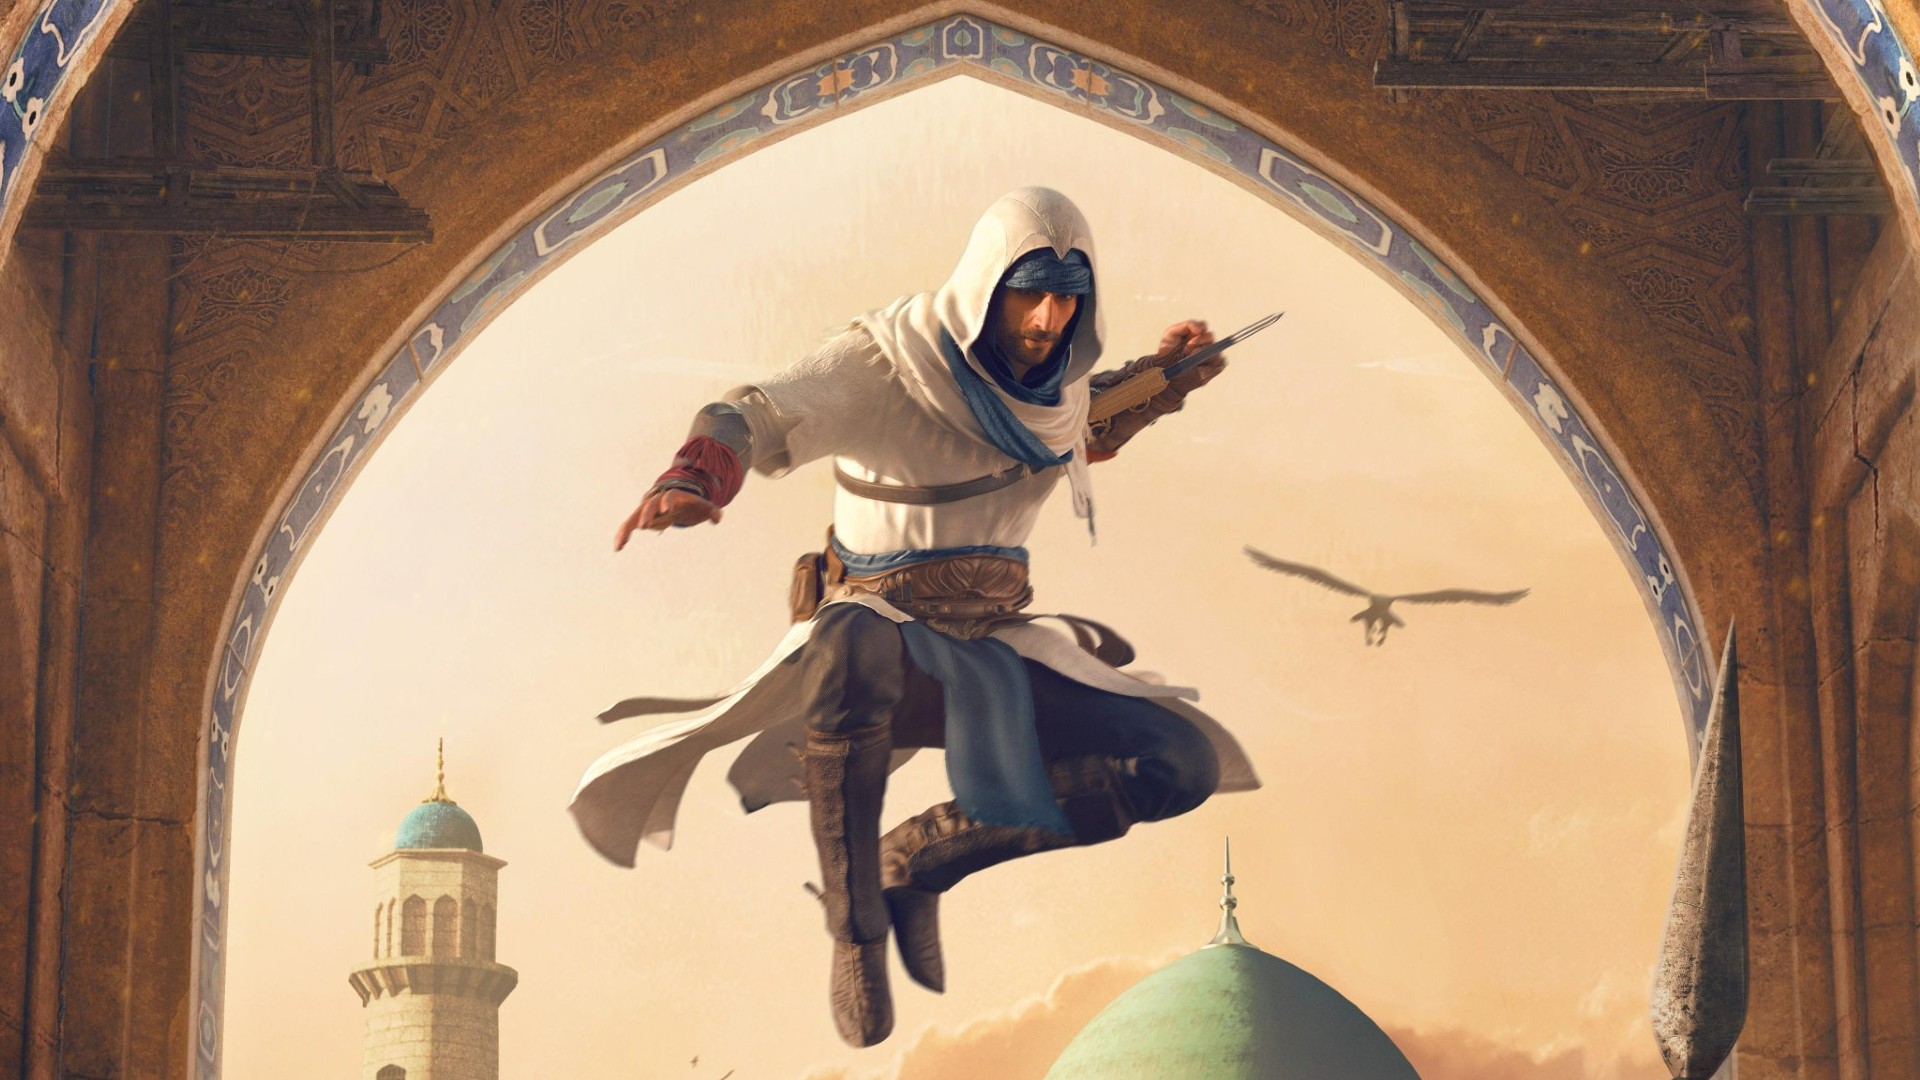 Assassin's Creed Rumors - Valhalla DLC turned into full spin-off